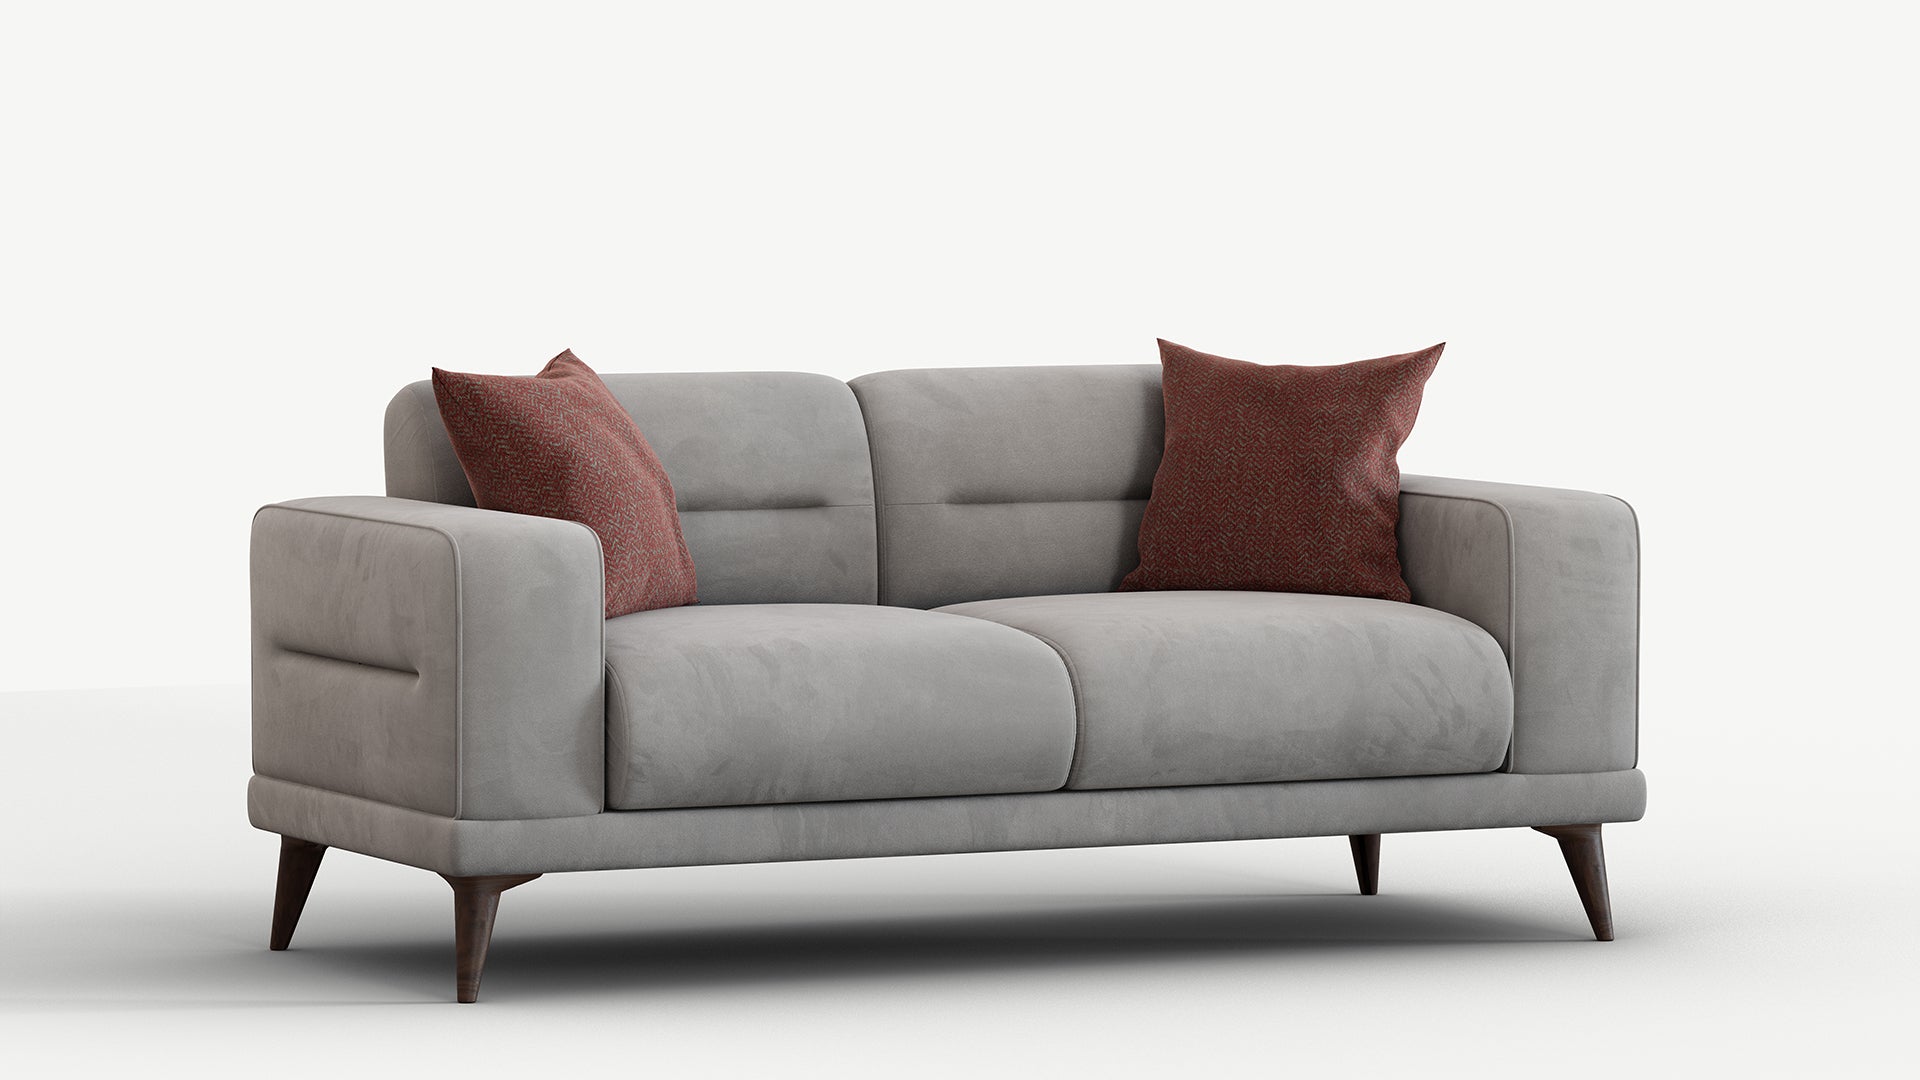 Etna 2 Seater Sofa Bed